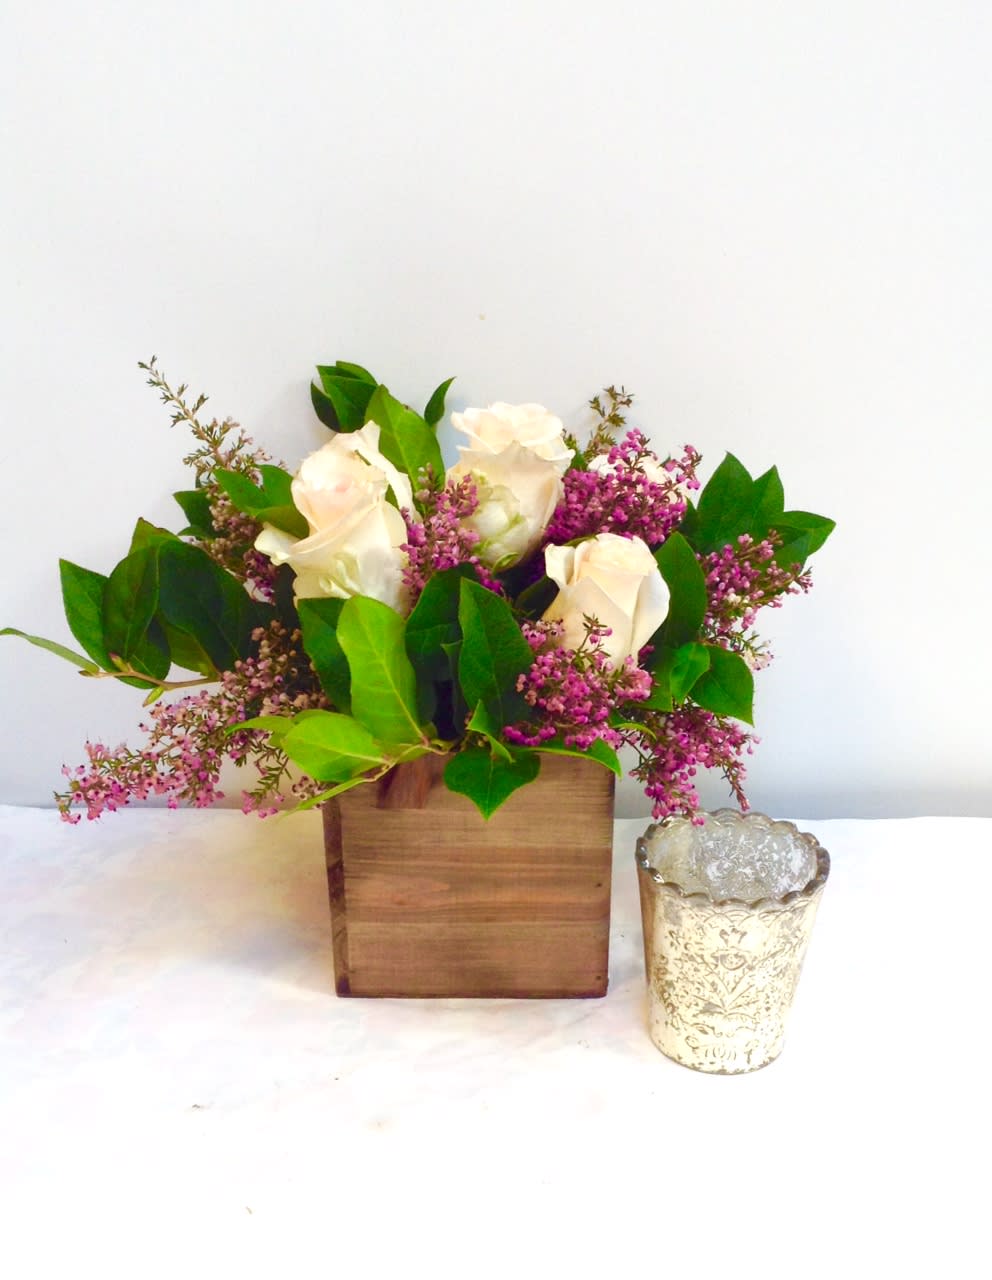 This adorable rustic wooden box is filled with pale pink roses and